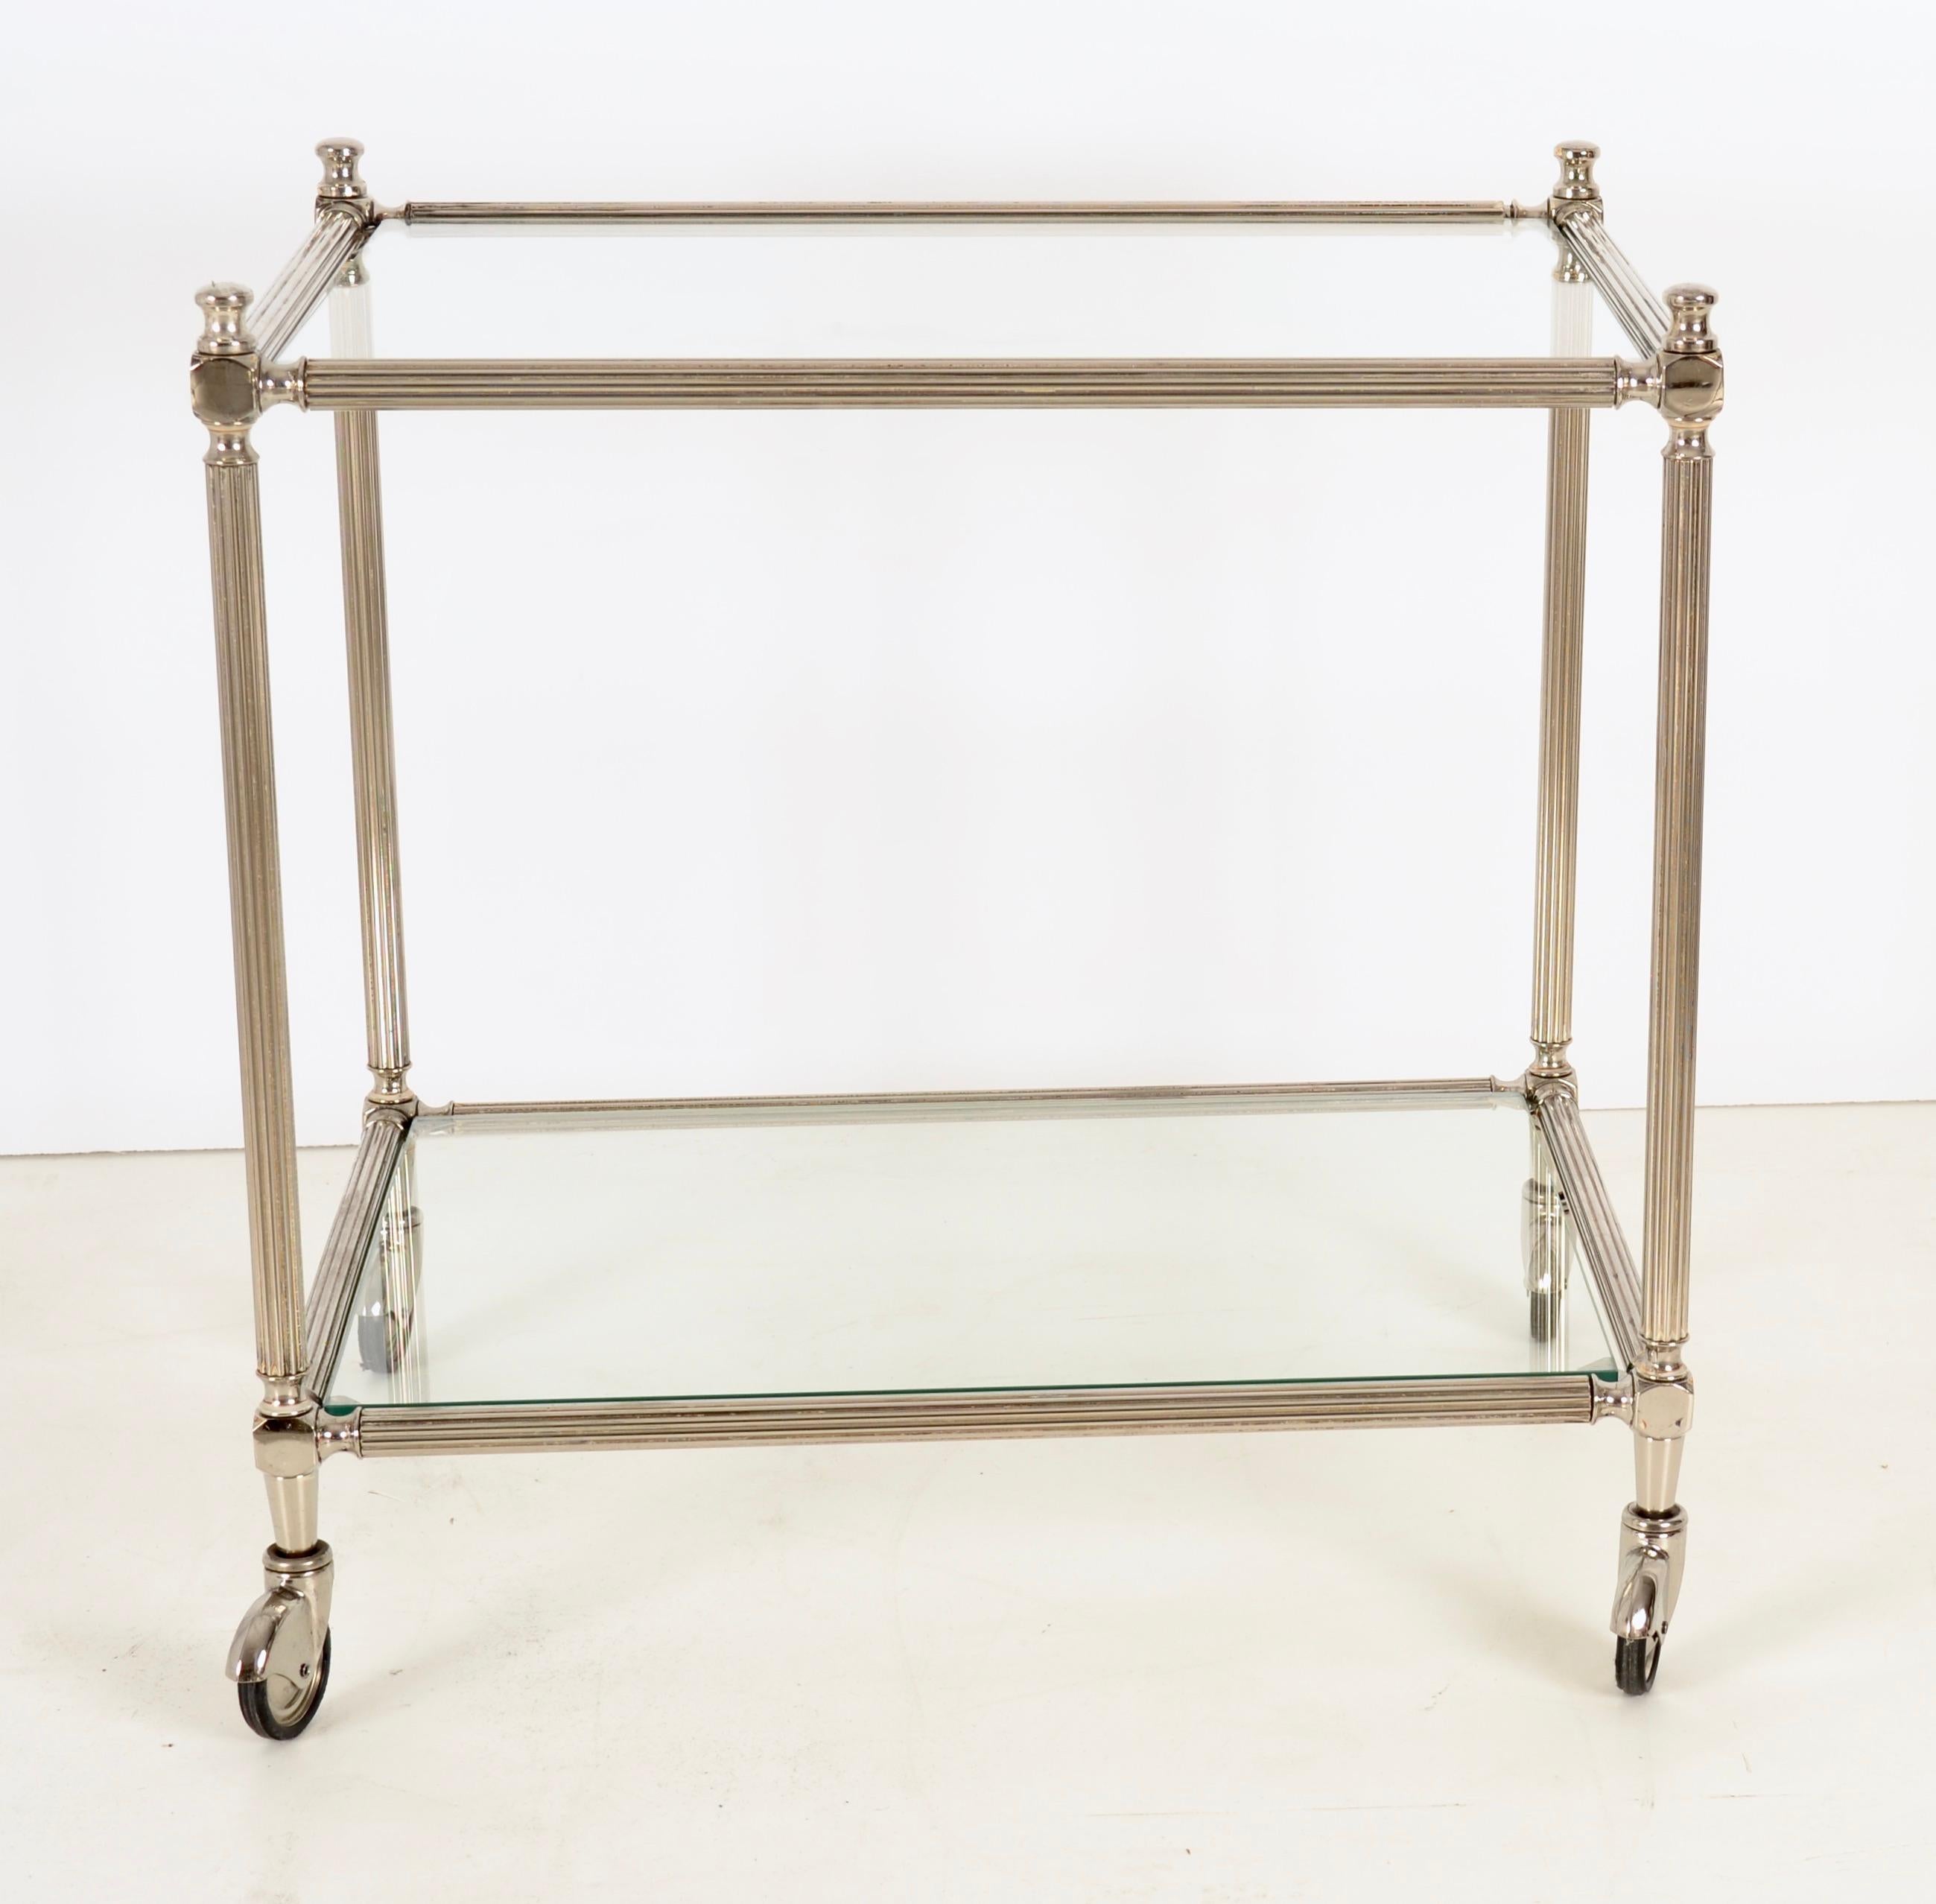 Glamorous cocktail cart, made in Italy, featuring fluted column legs, glass top and lower glass shelf. The silver finished metal has been newly polished and lacquered. The original swiveling wheels have been polished and are in fine working